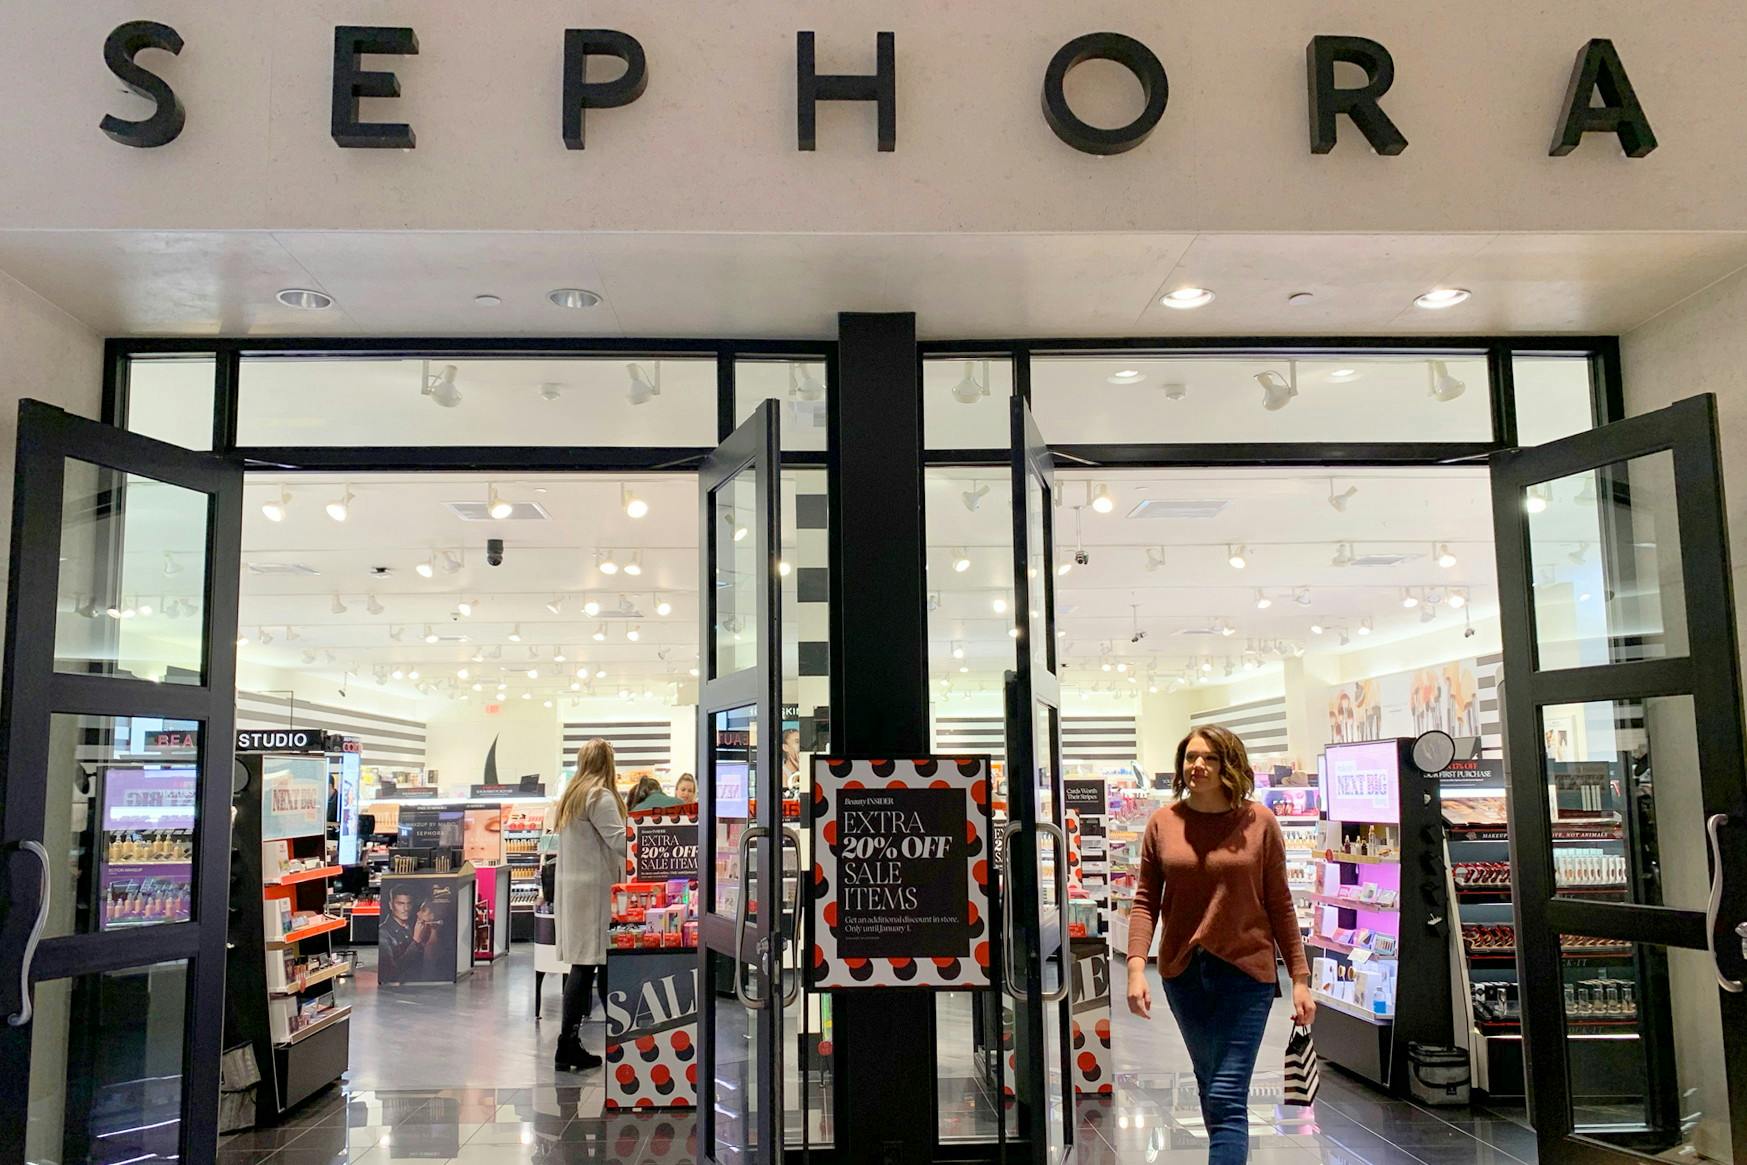 Woman walking out of Sephora store with shopping bag.